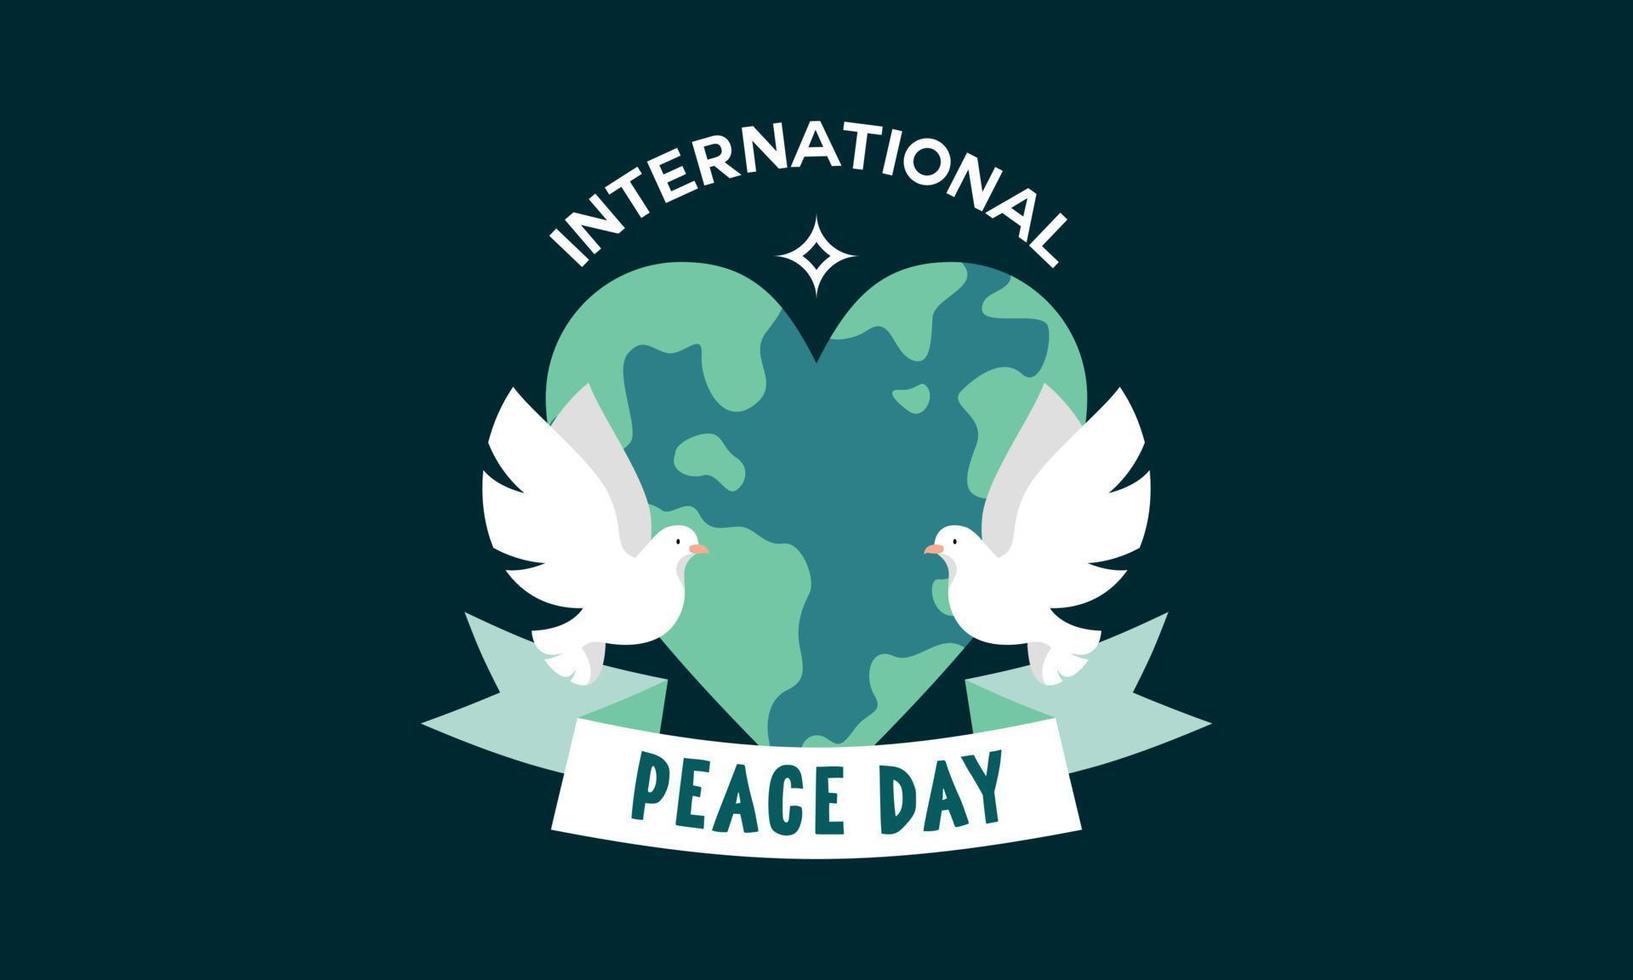 International day of peace concept flat design vector